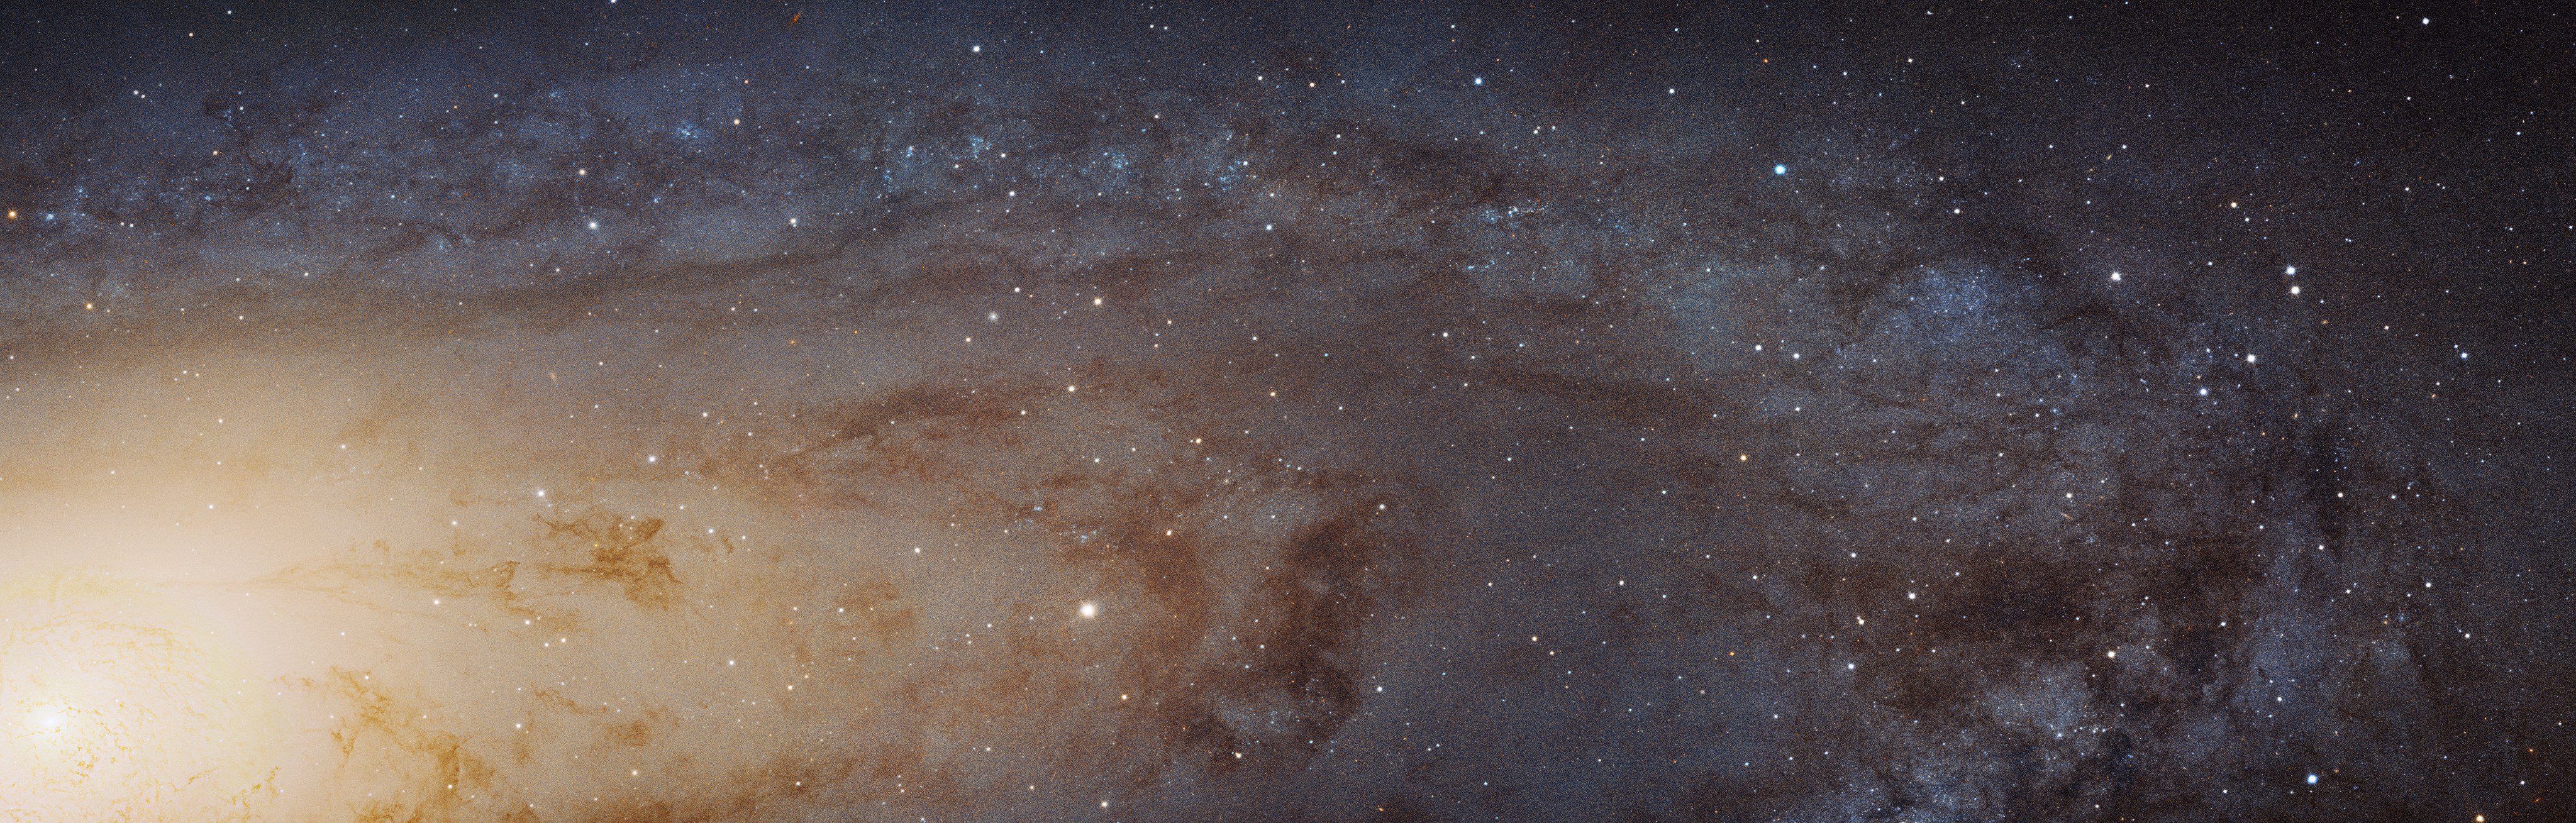 This sweeping bird's-eye view of a portion of the Andromeda galaxy (M31) shows stars, lanes of dark dust and bright core. The central region is on the left.